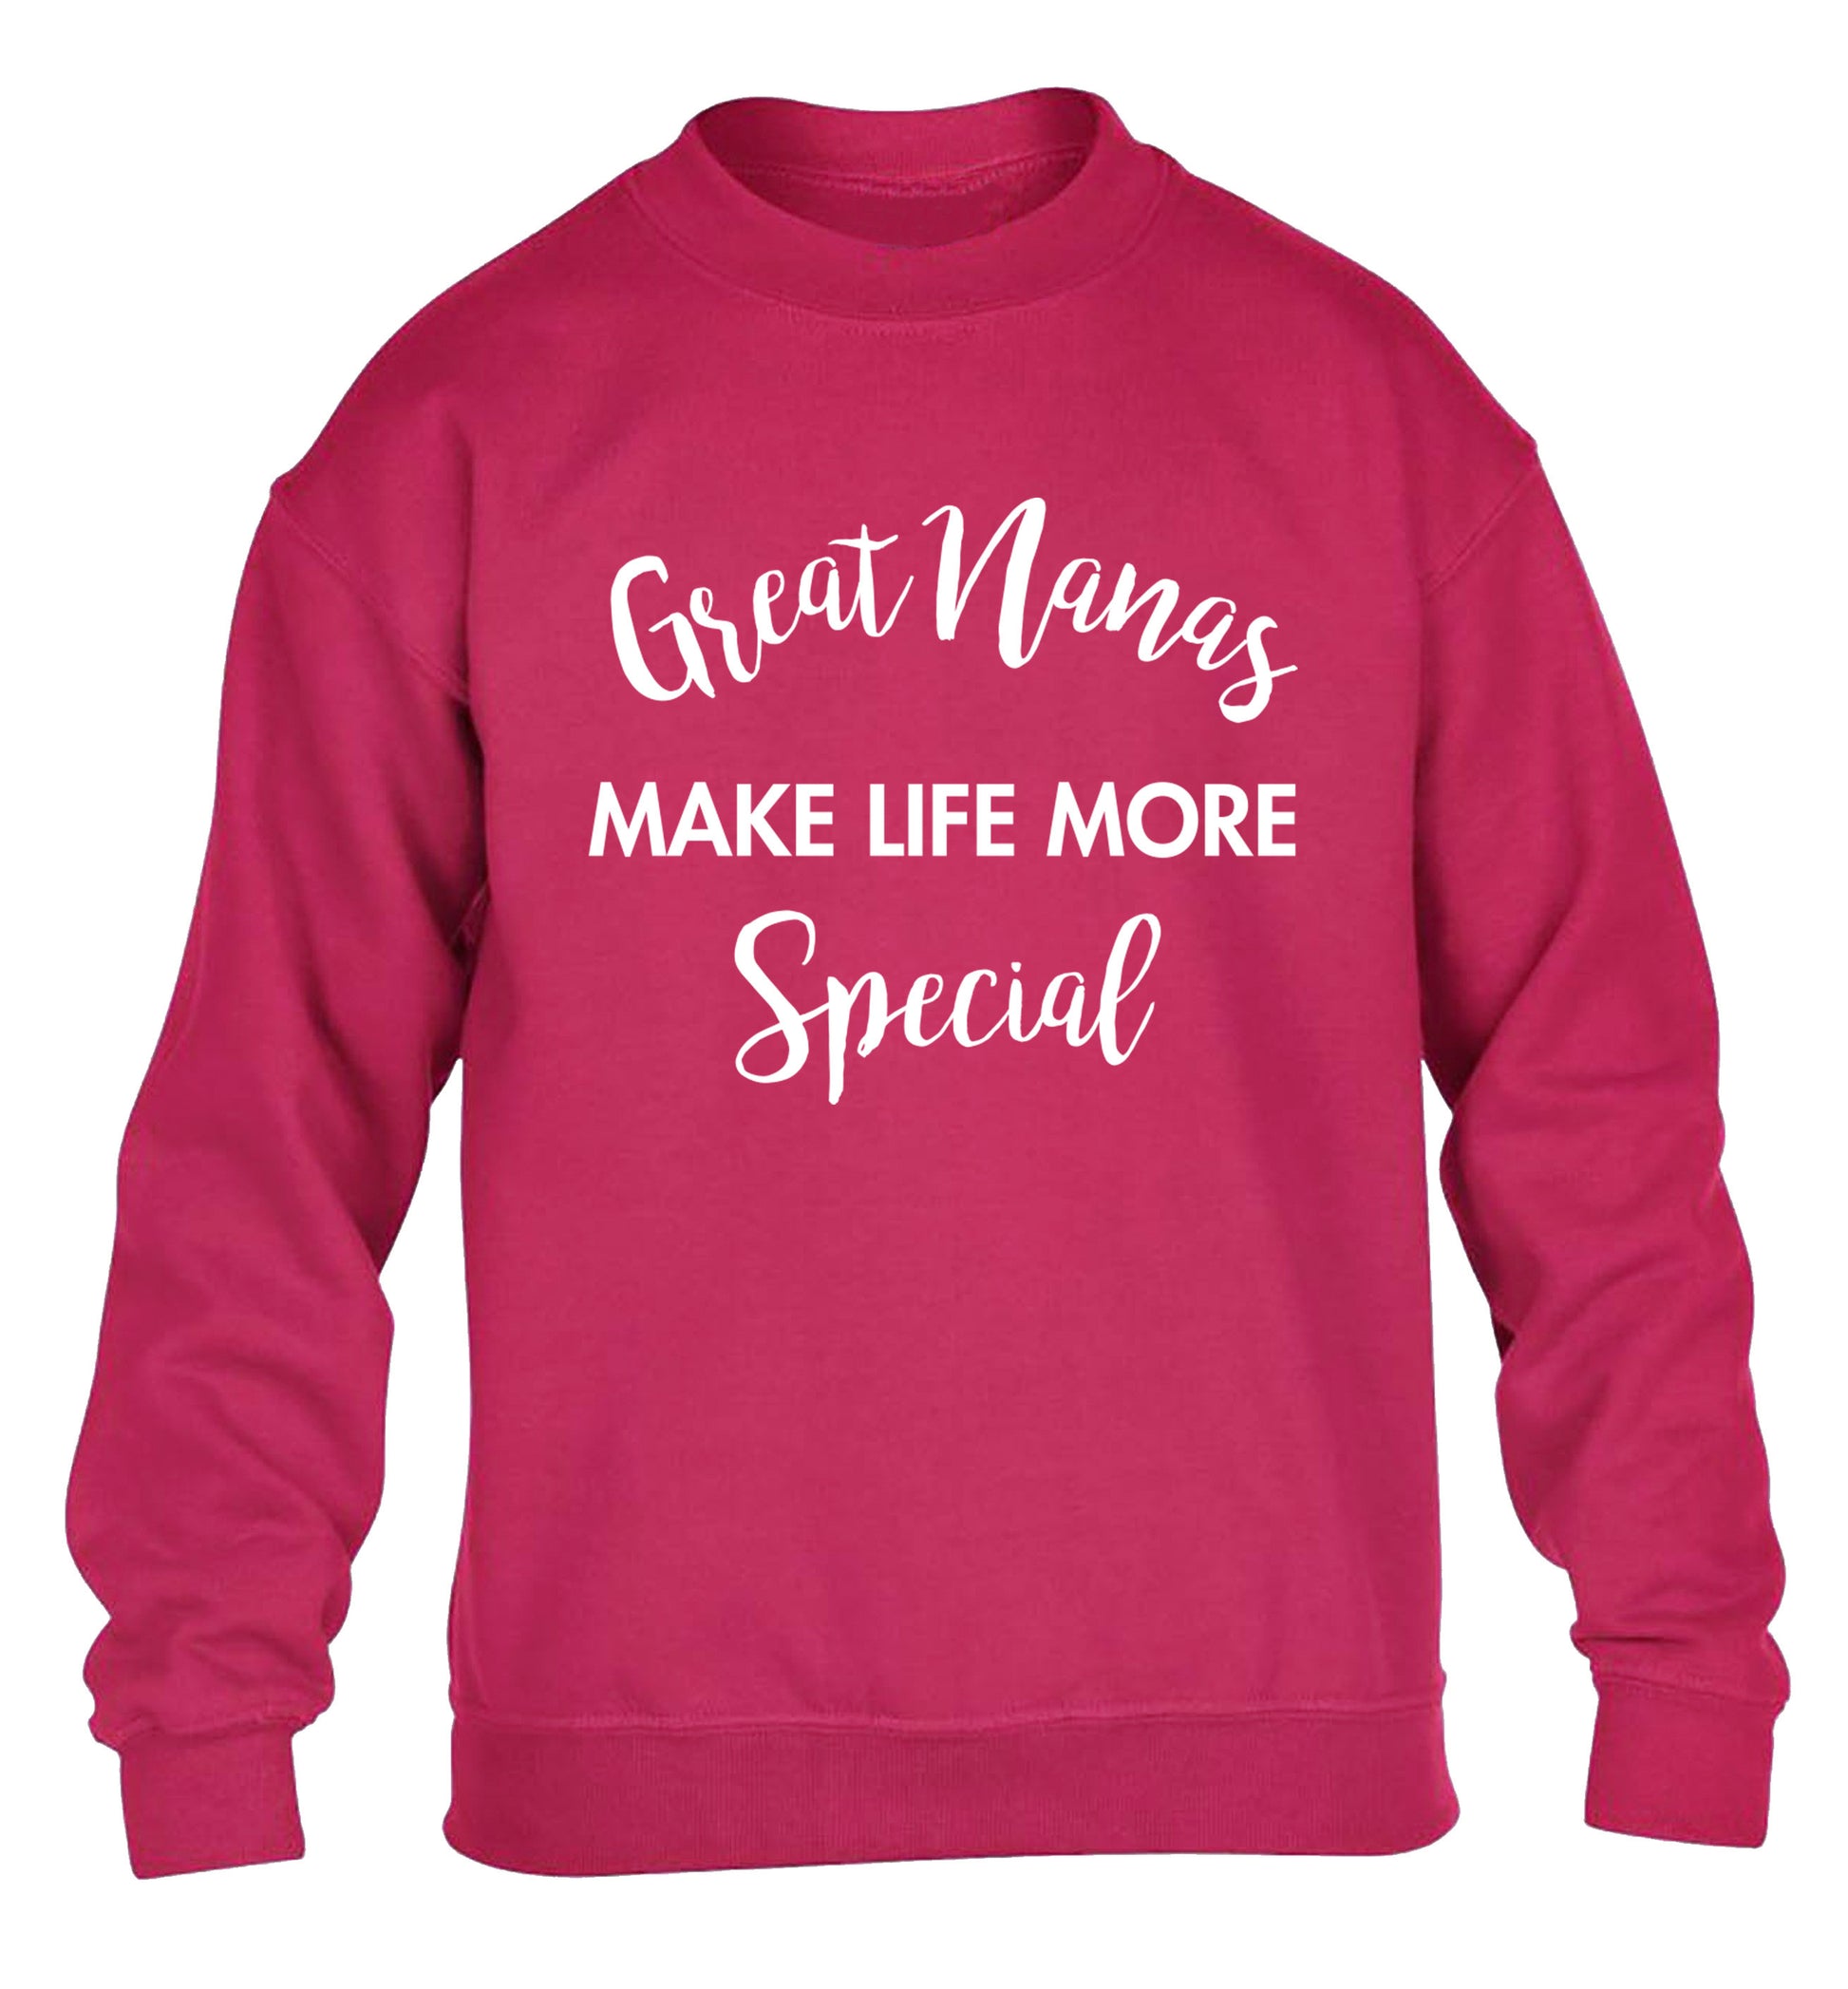 Great nanas make life more special children's pink sweater 12-14 Years